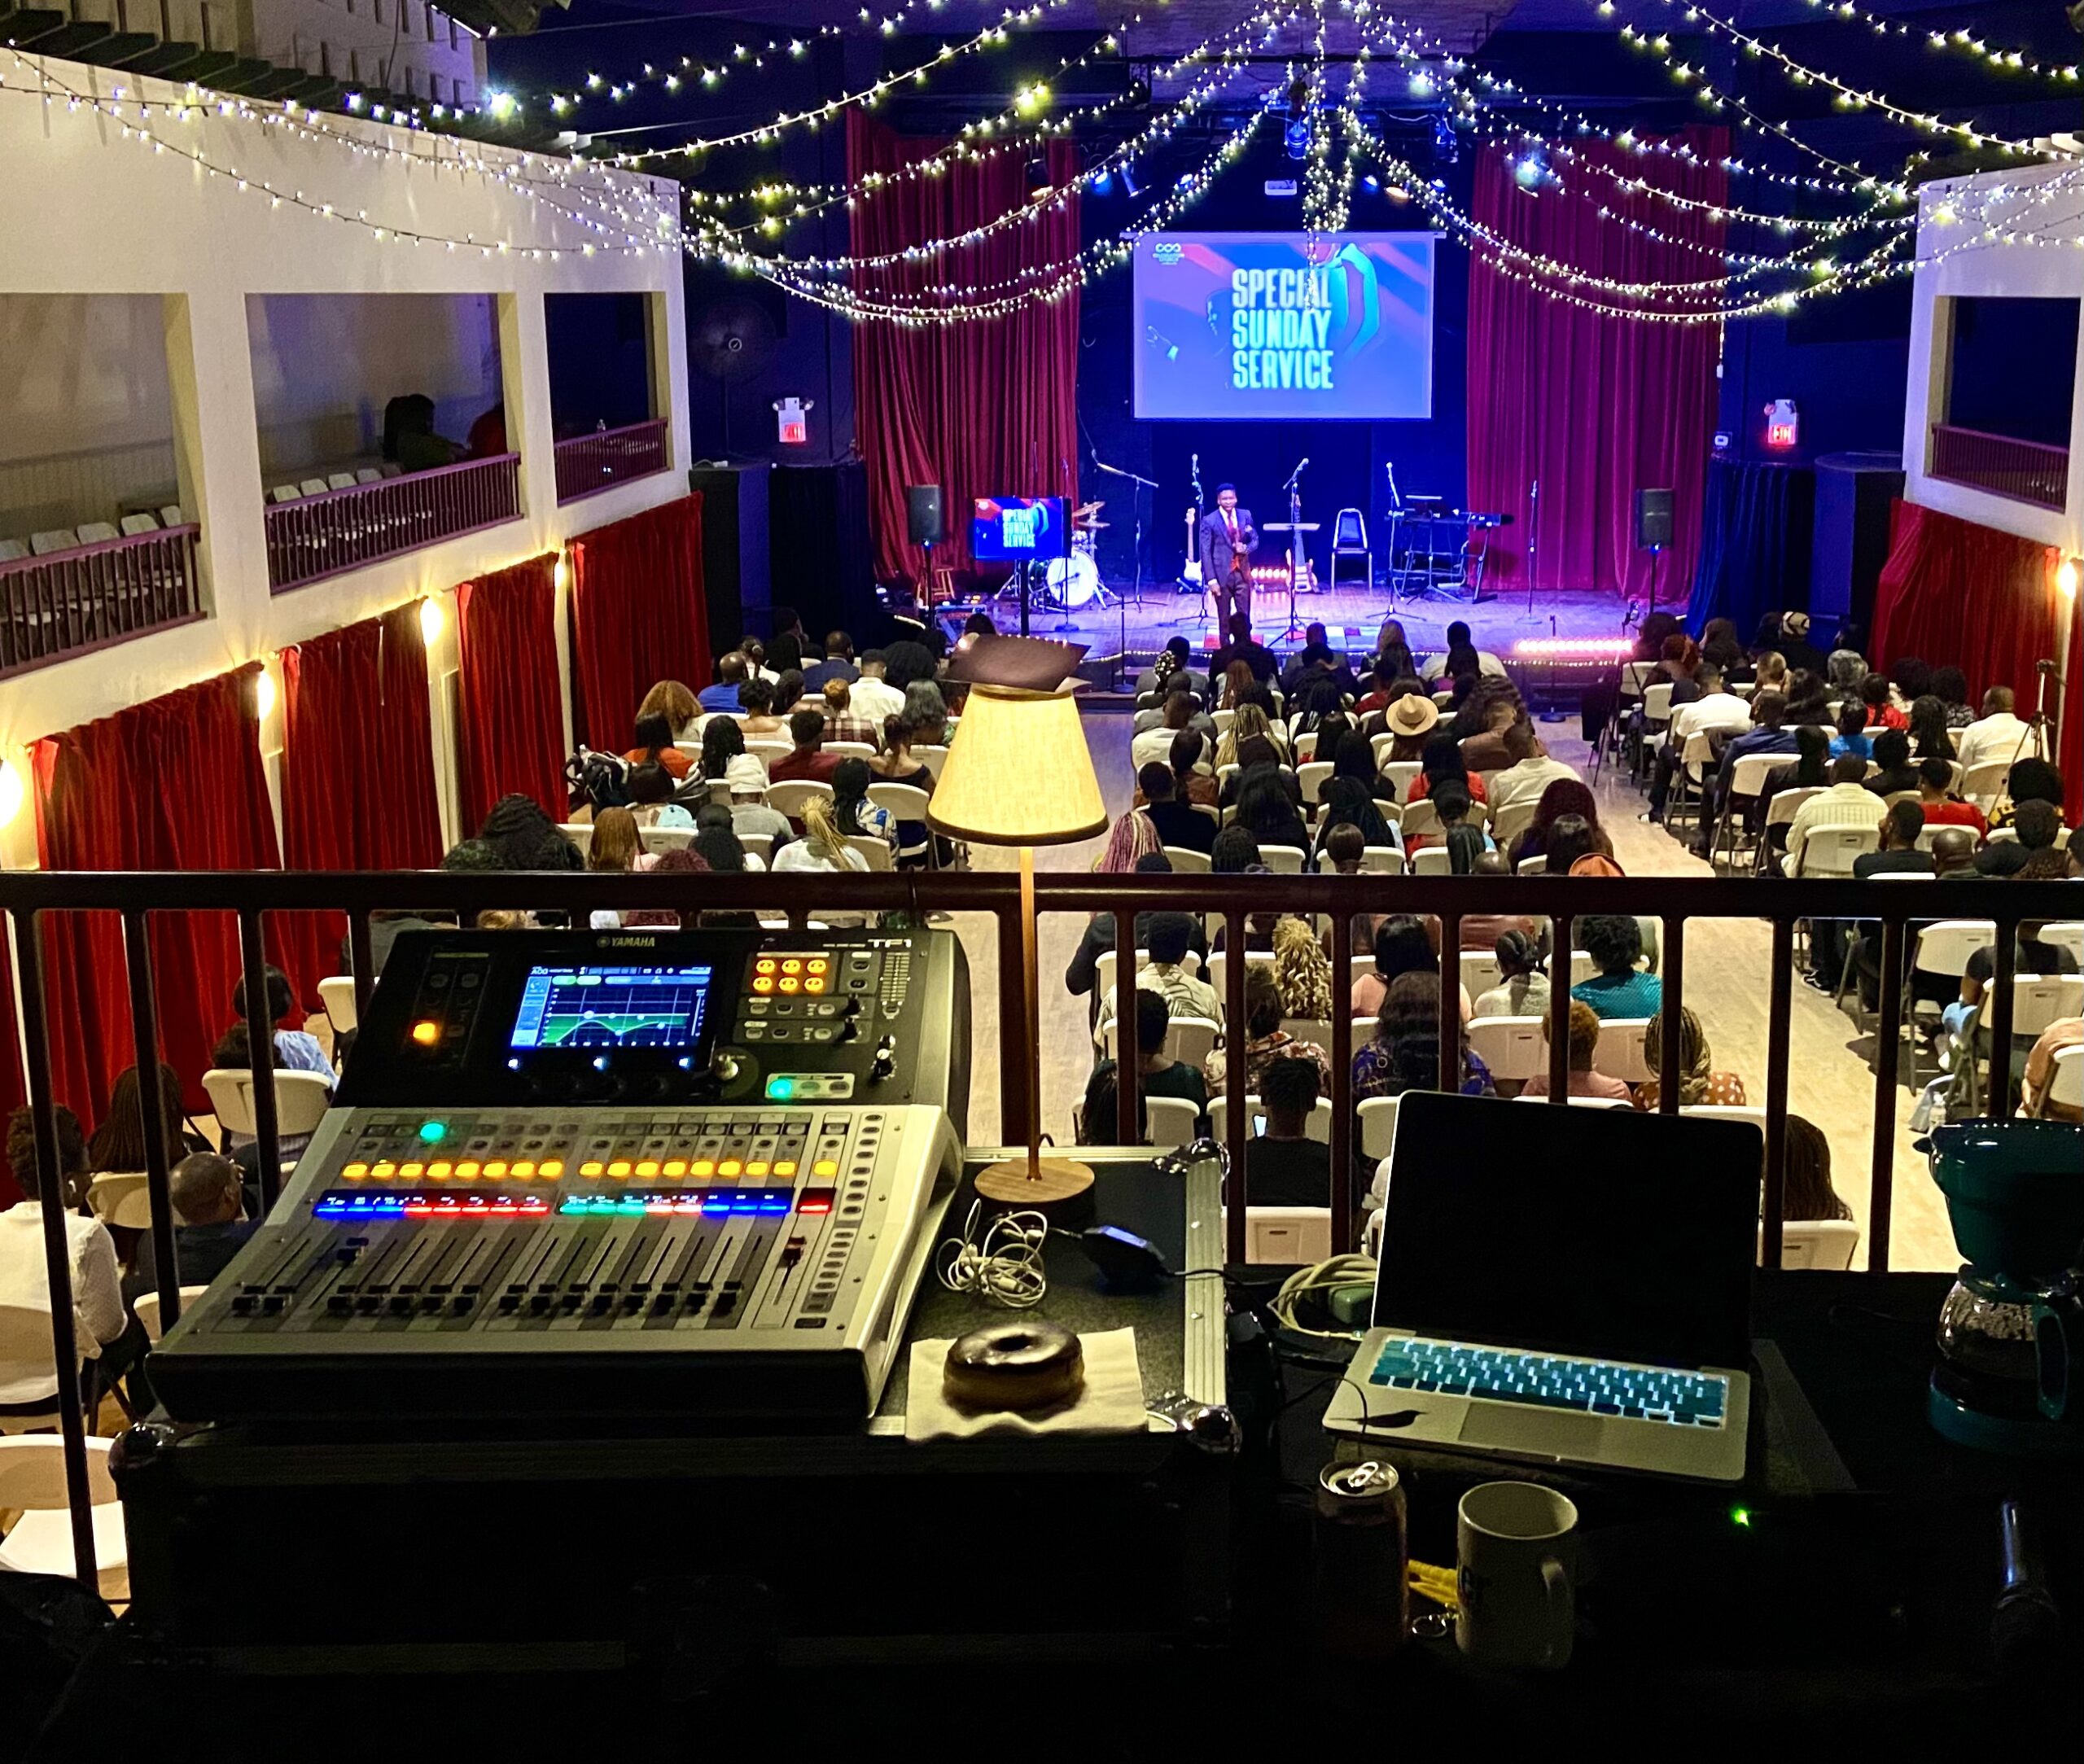 State-of-the-art sound equipment setup by Creative Worship Audio for a Plano conference.